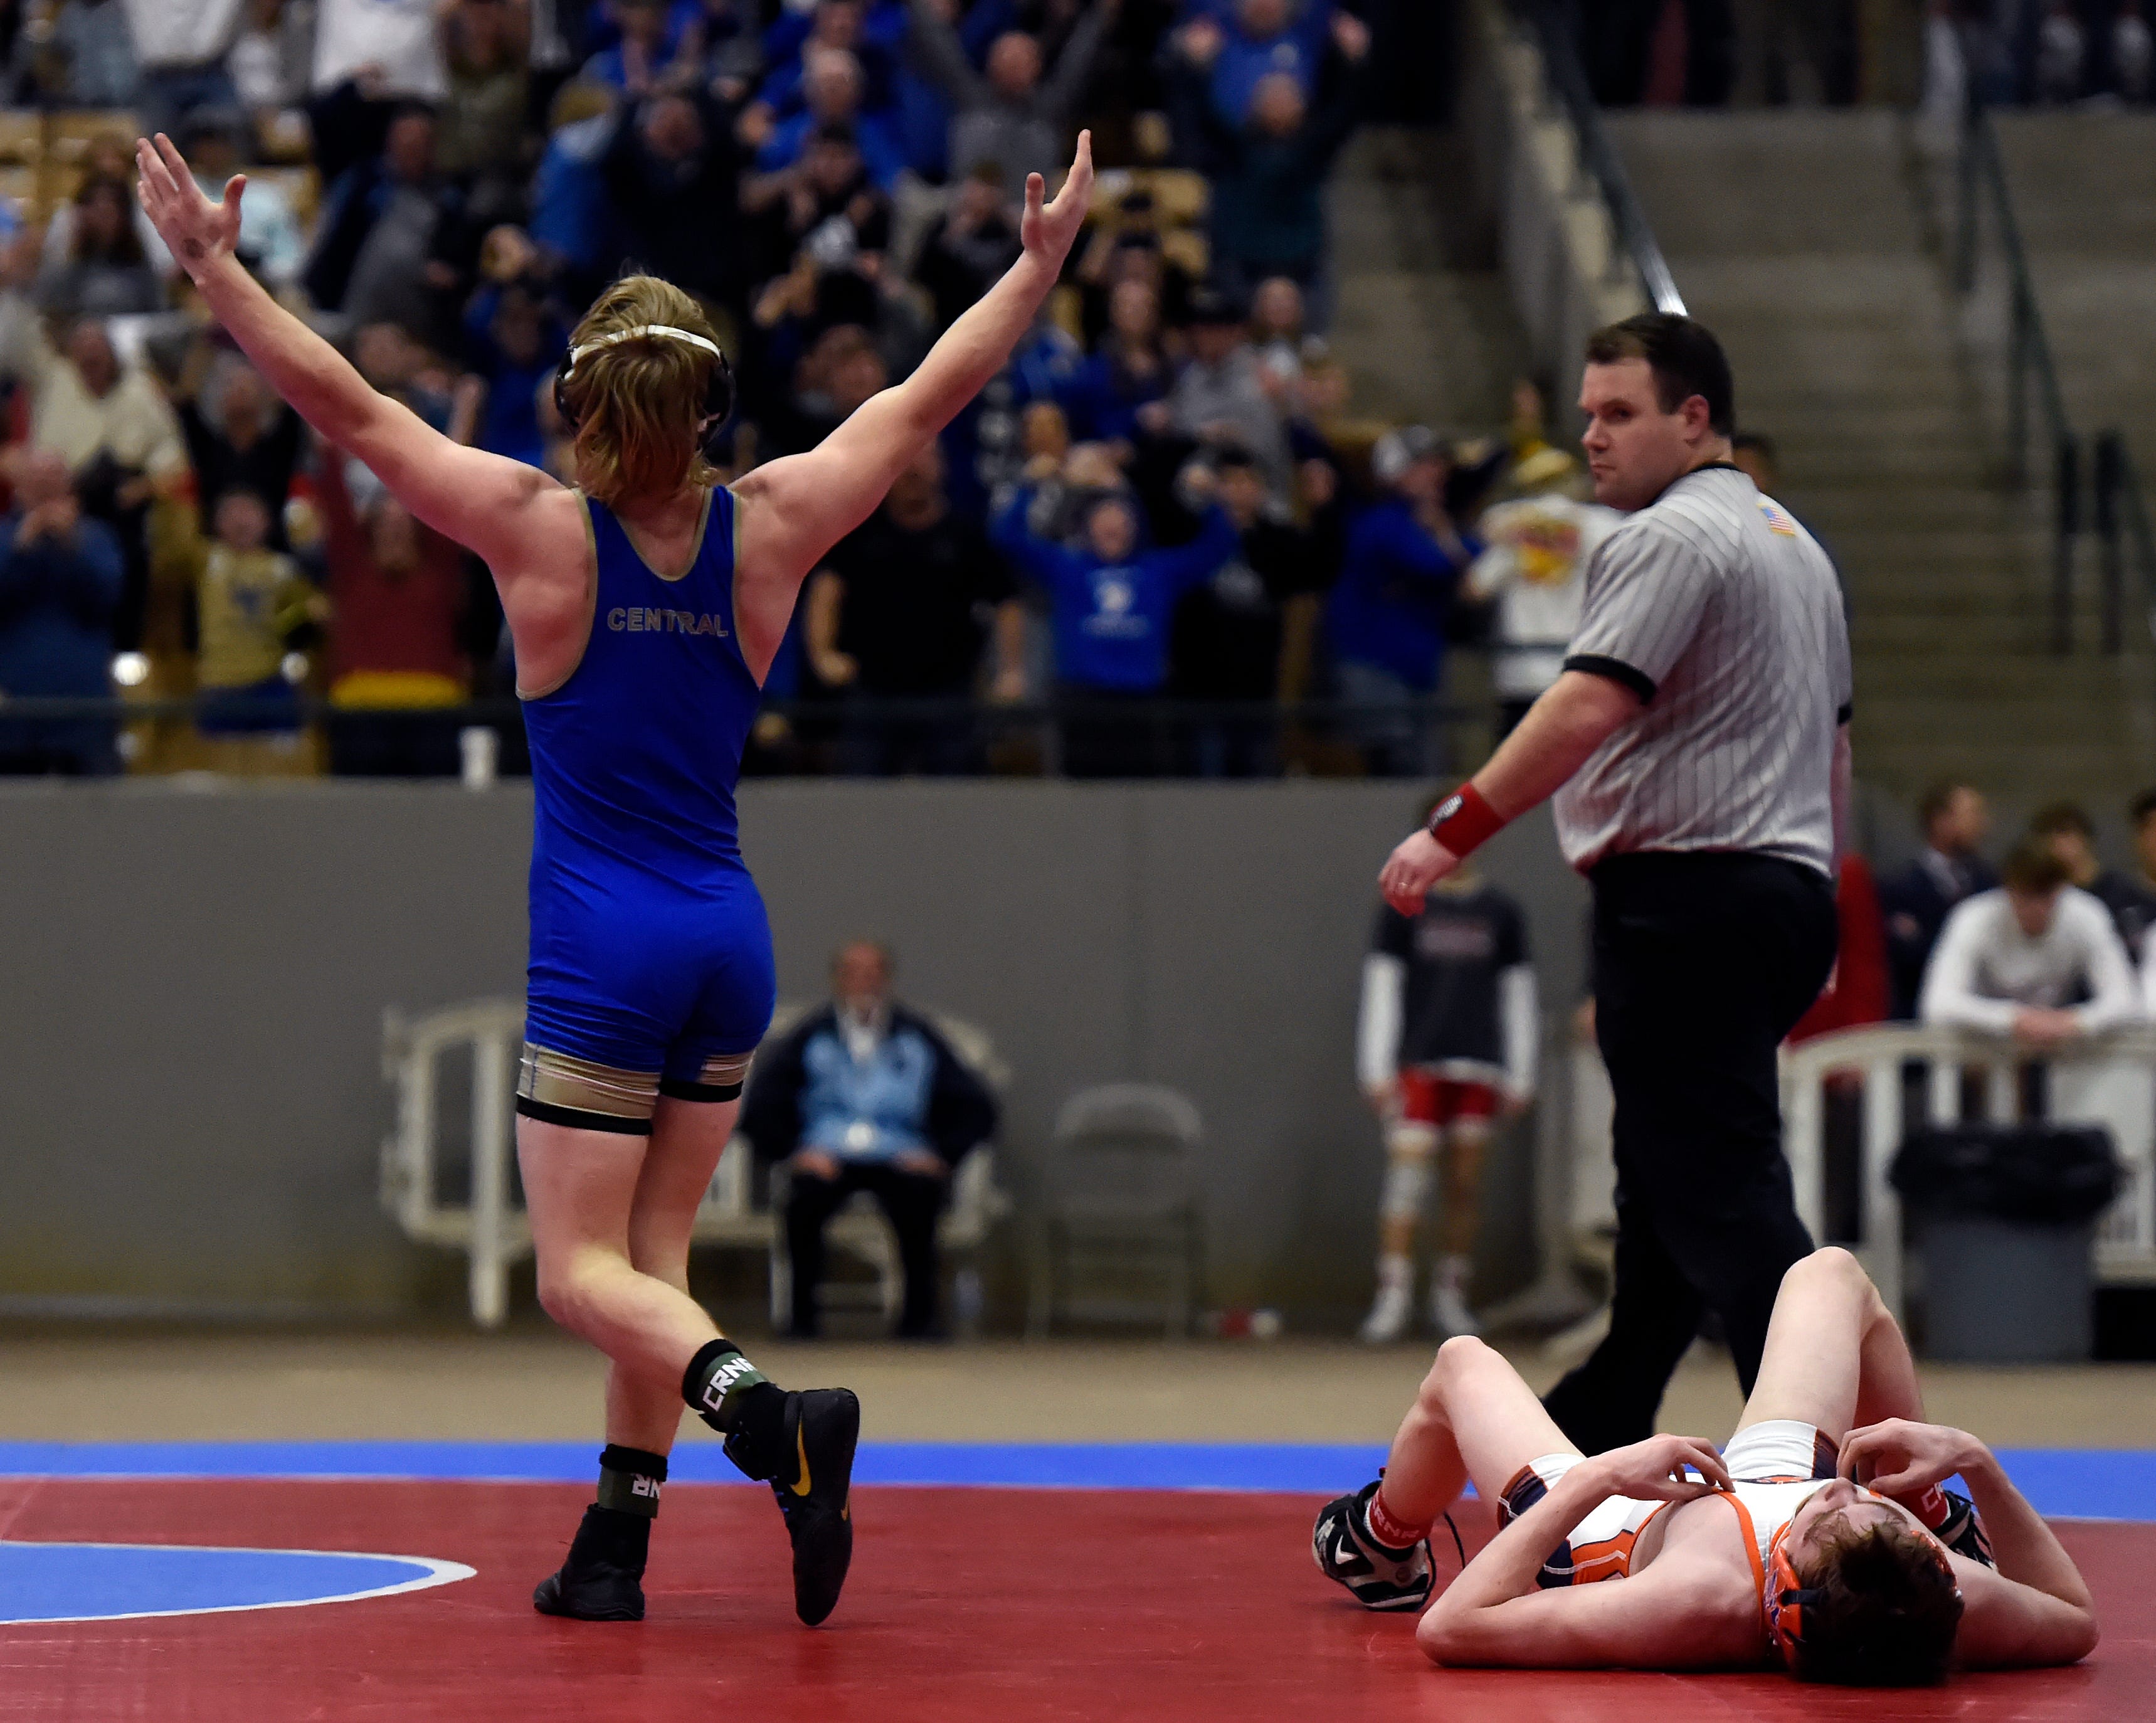 TSSAA wrestling New site for state tournaments, duals field reduced